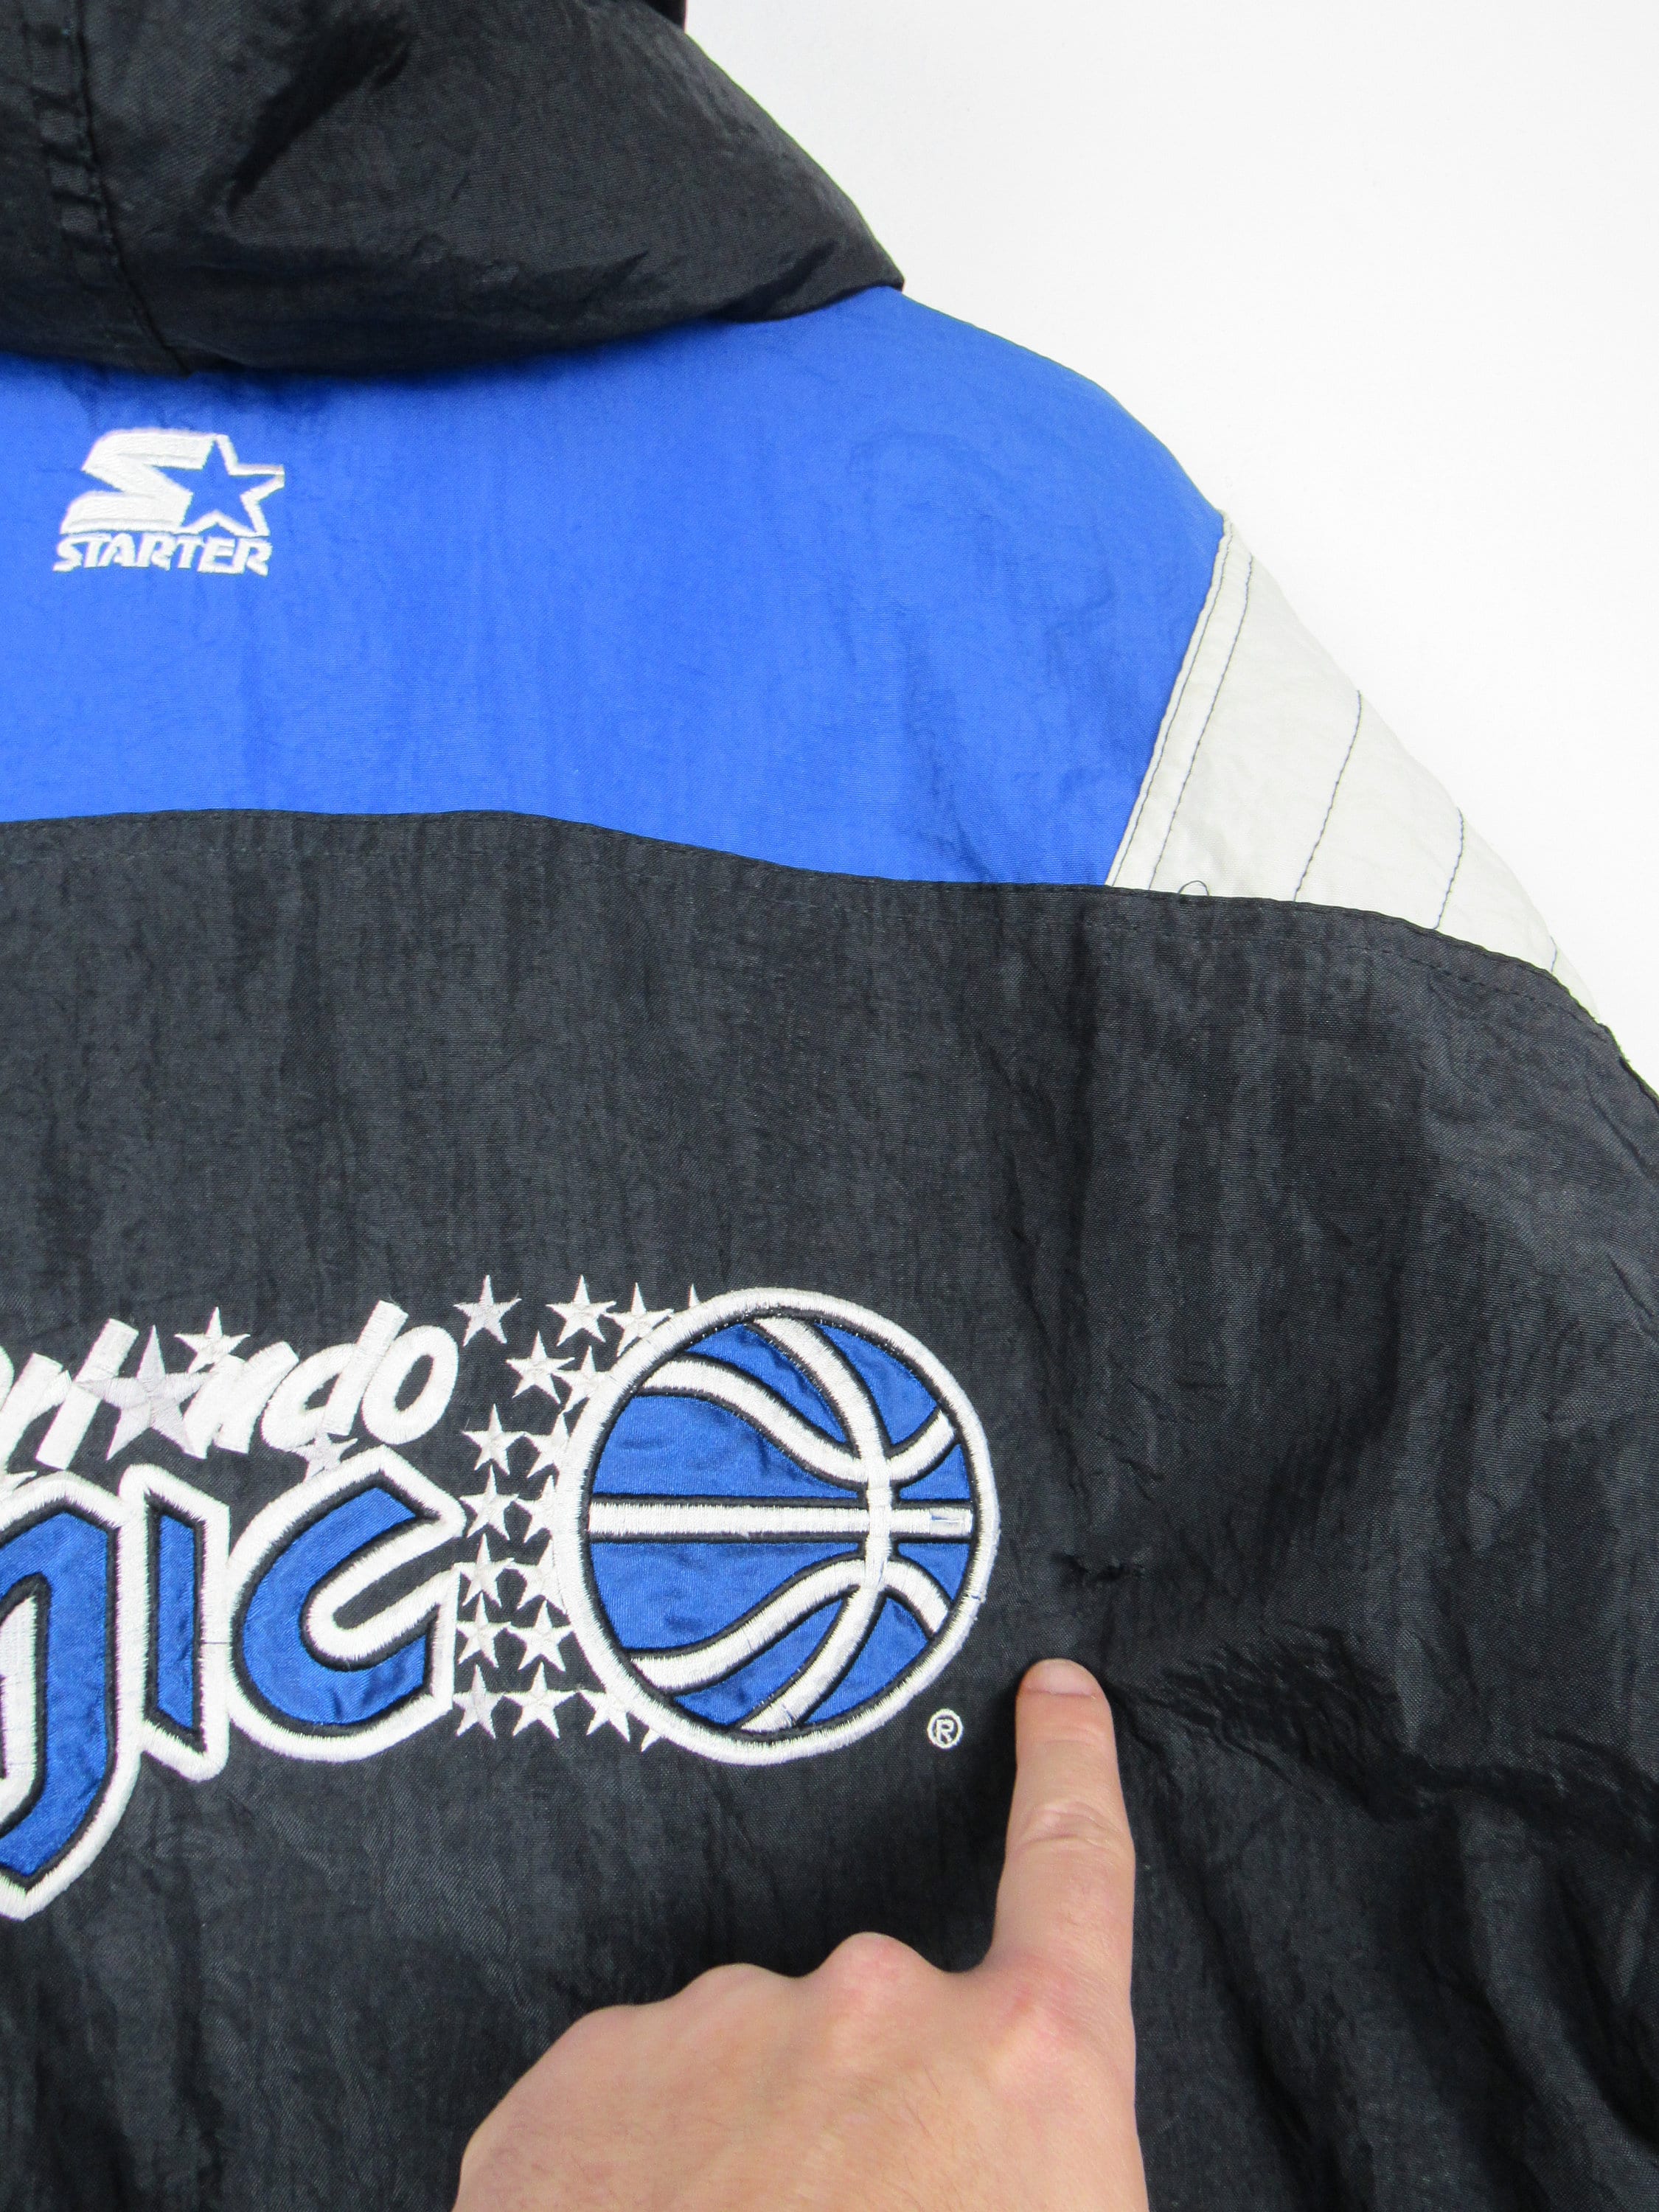 Vintage Orlando Magic starter coat size Small 90s Pullover jacket Official  Licen